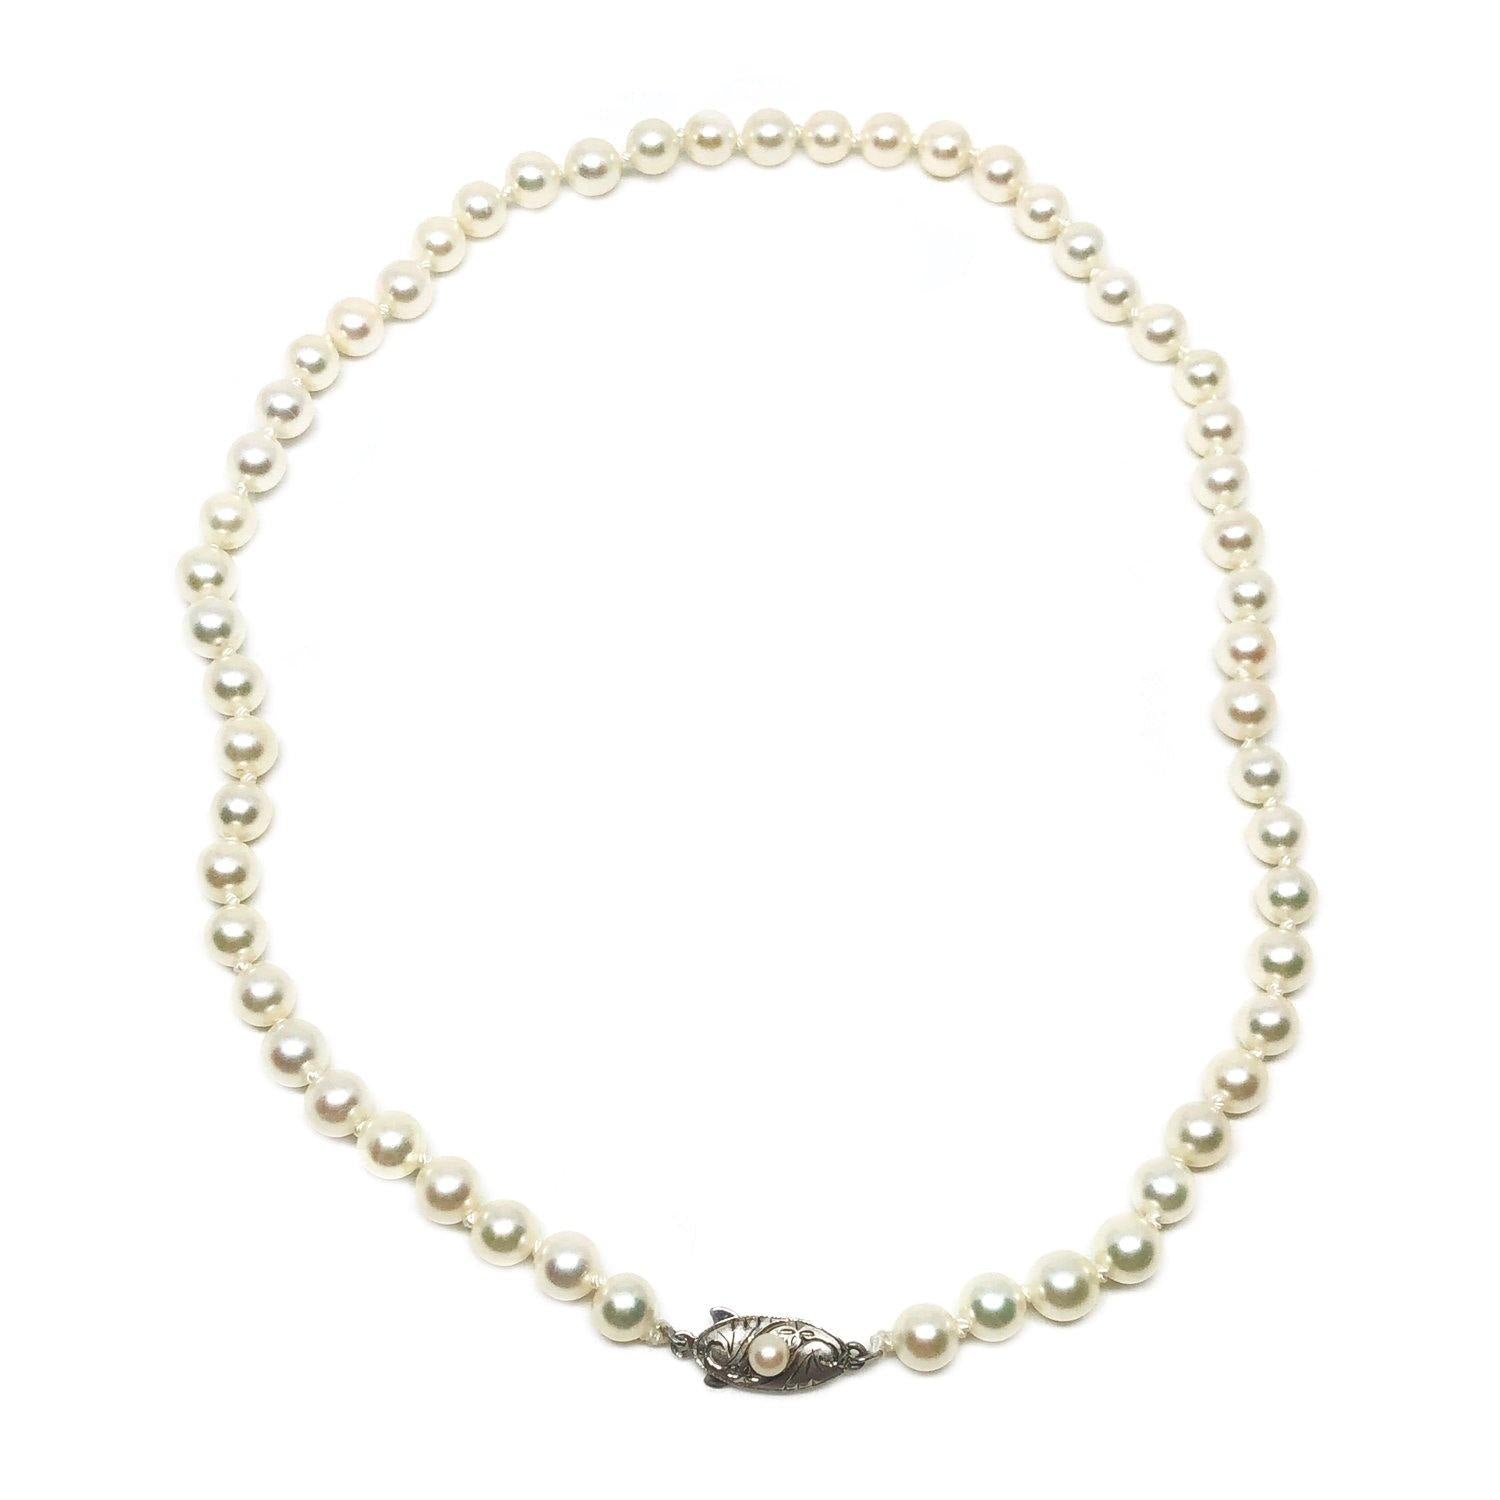 Classic Japanese Cultured Saltwater Akoya Pearl Necklace- Sterling Silver 16 Inch